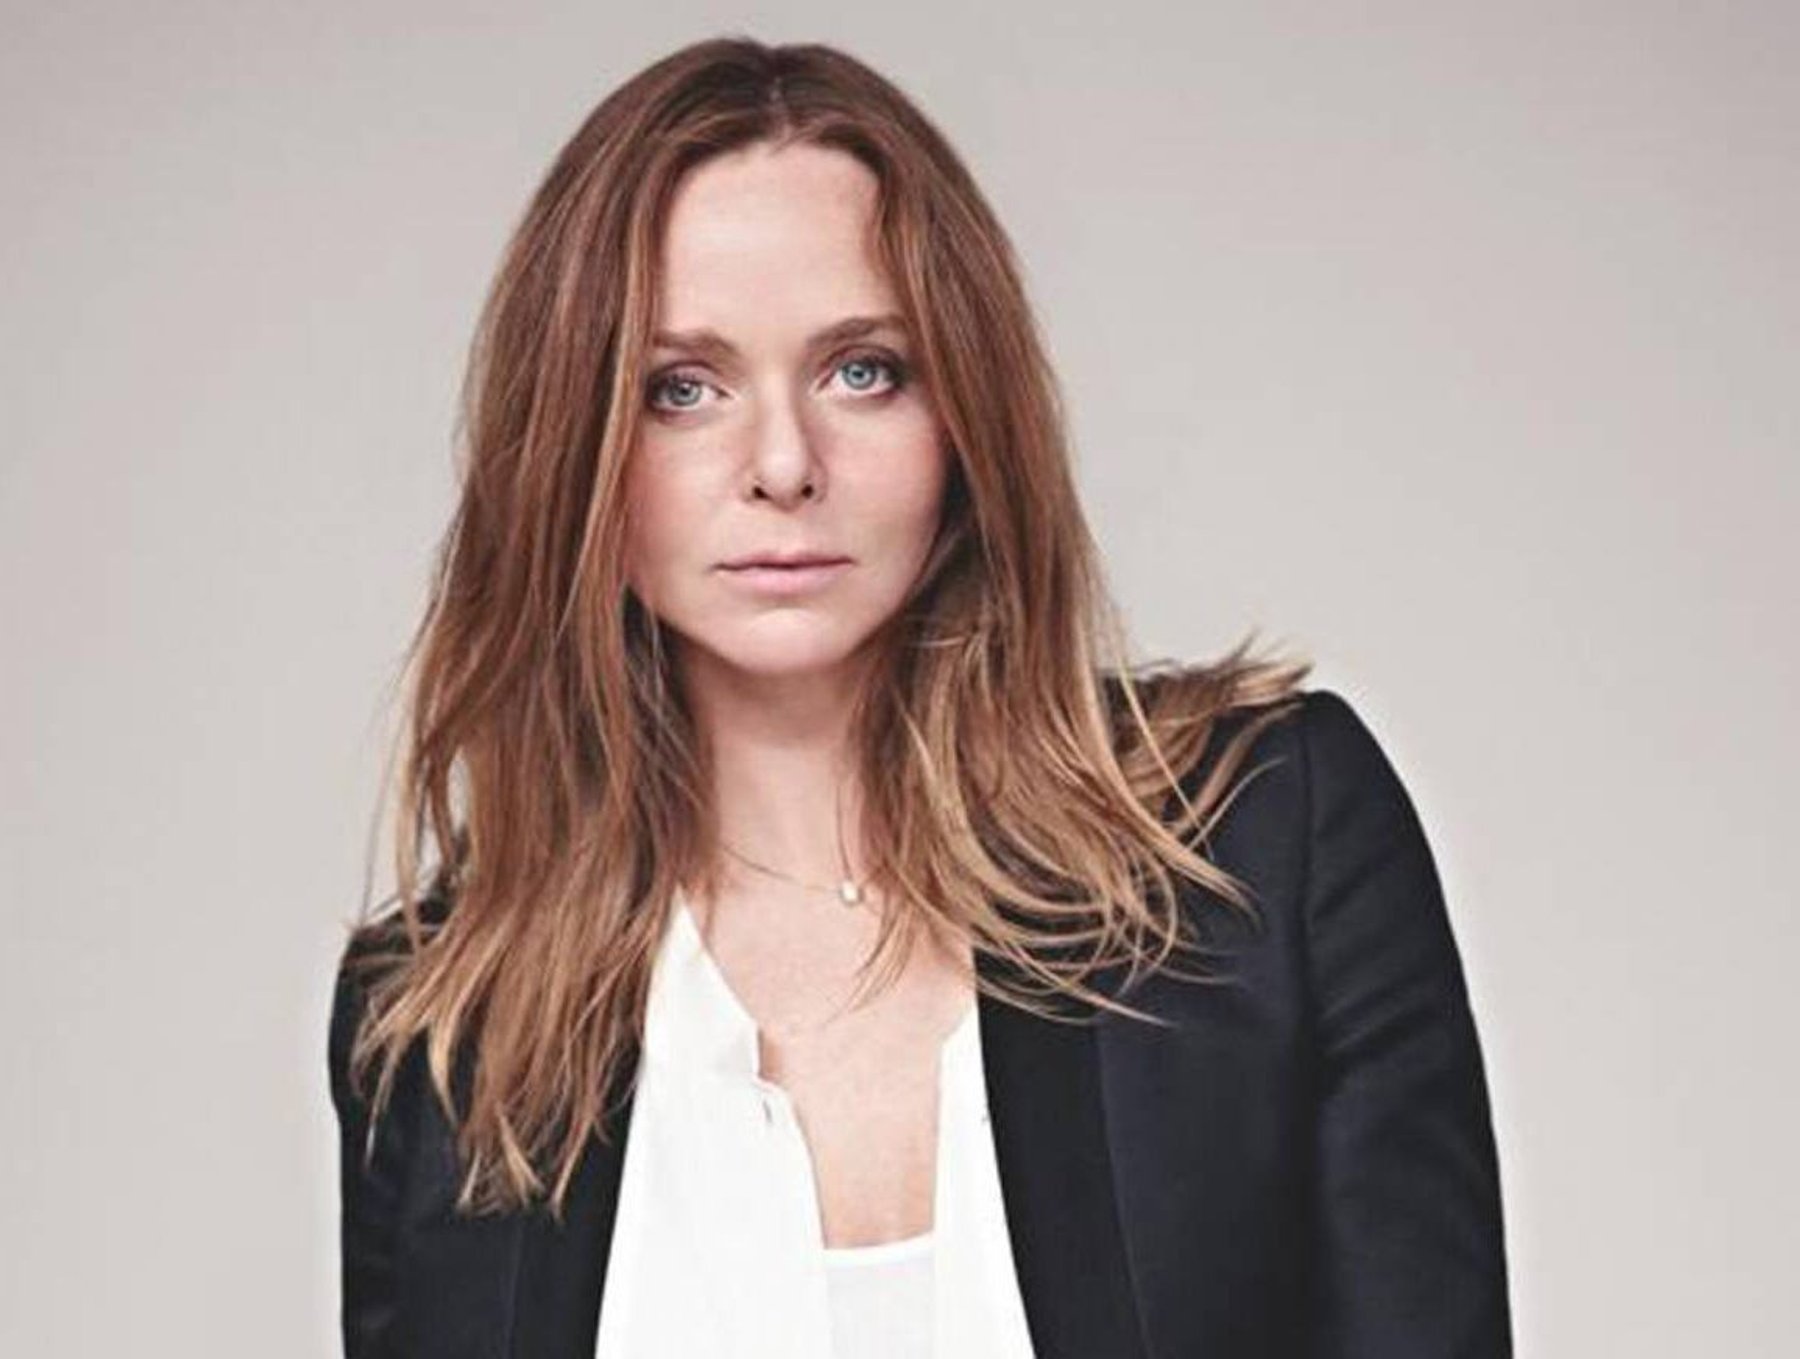 Stella McCartney is pushing for more regulation in the fashion